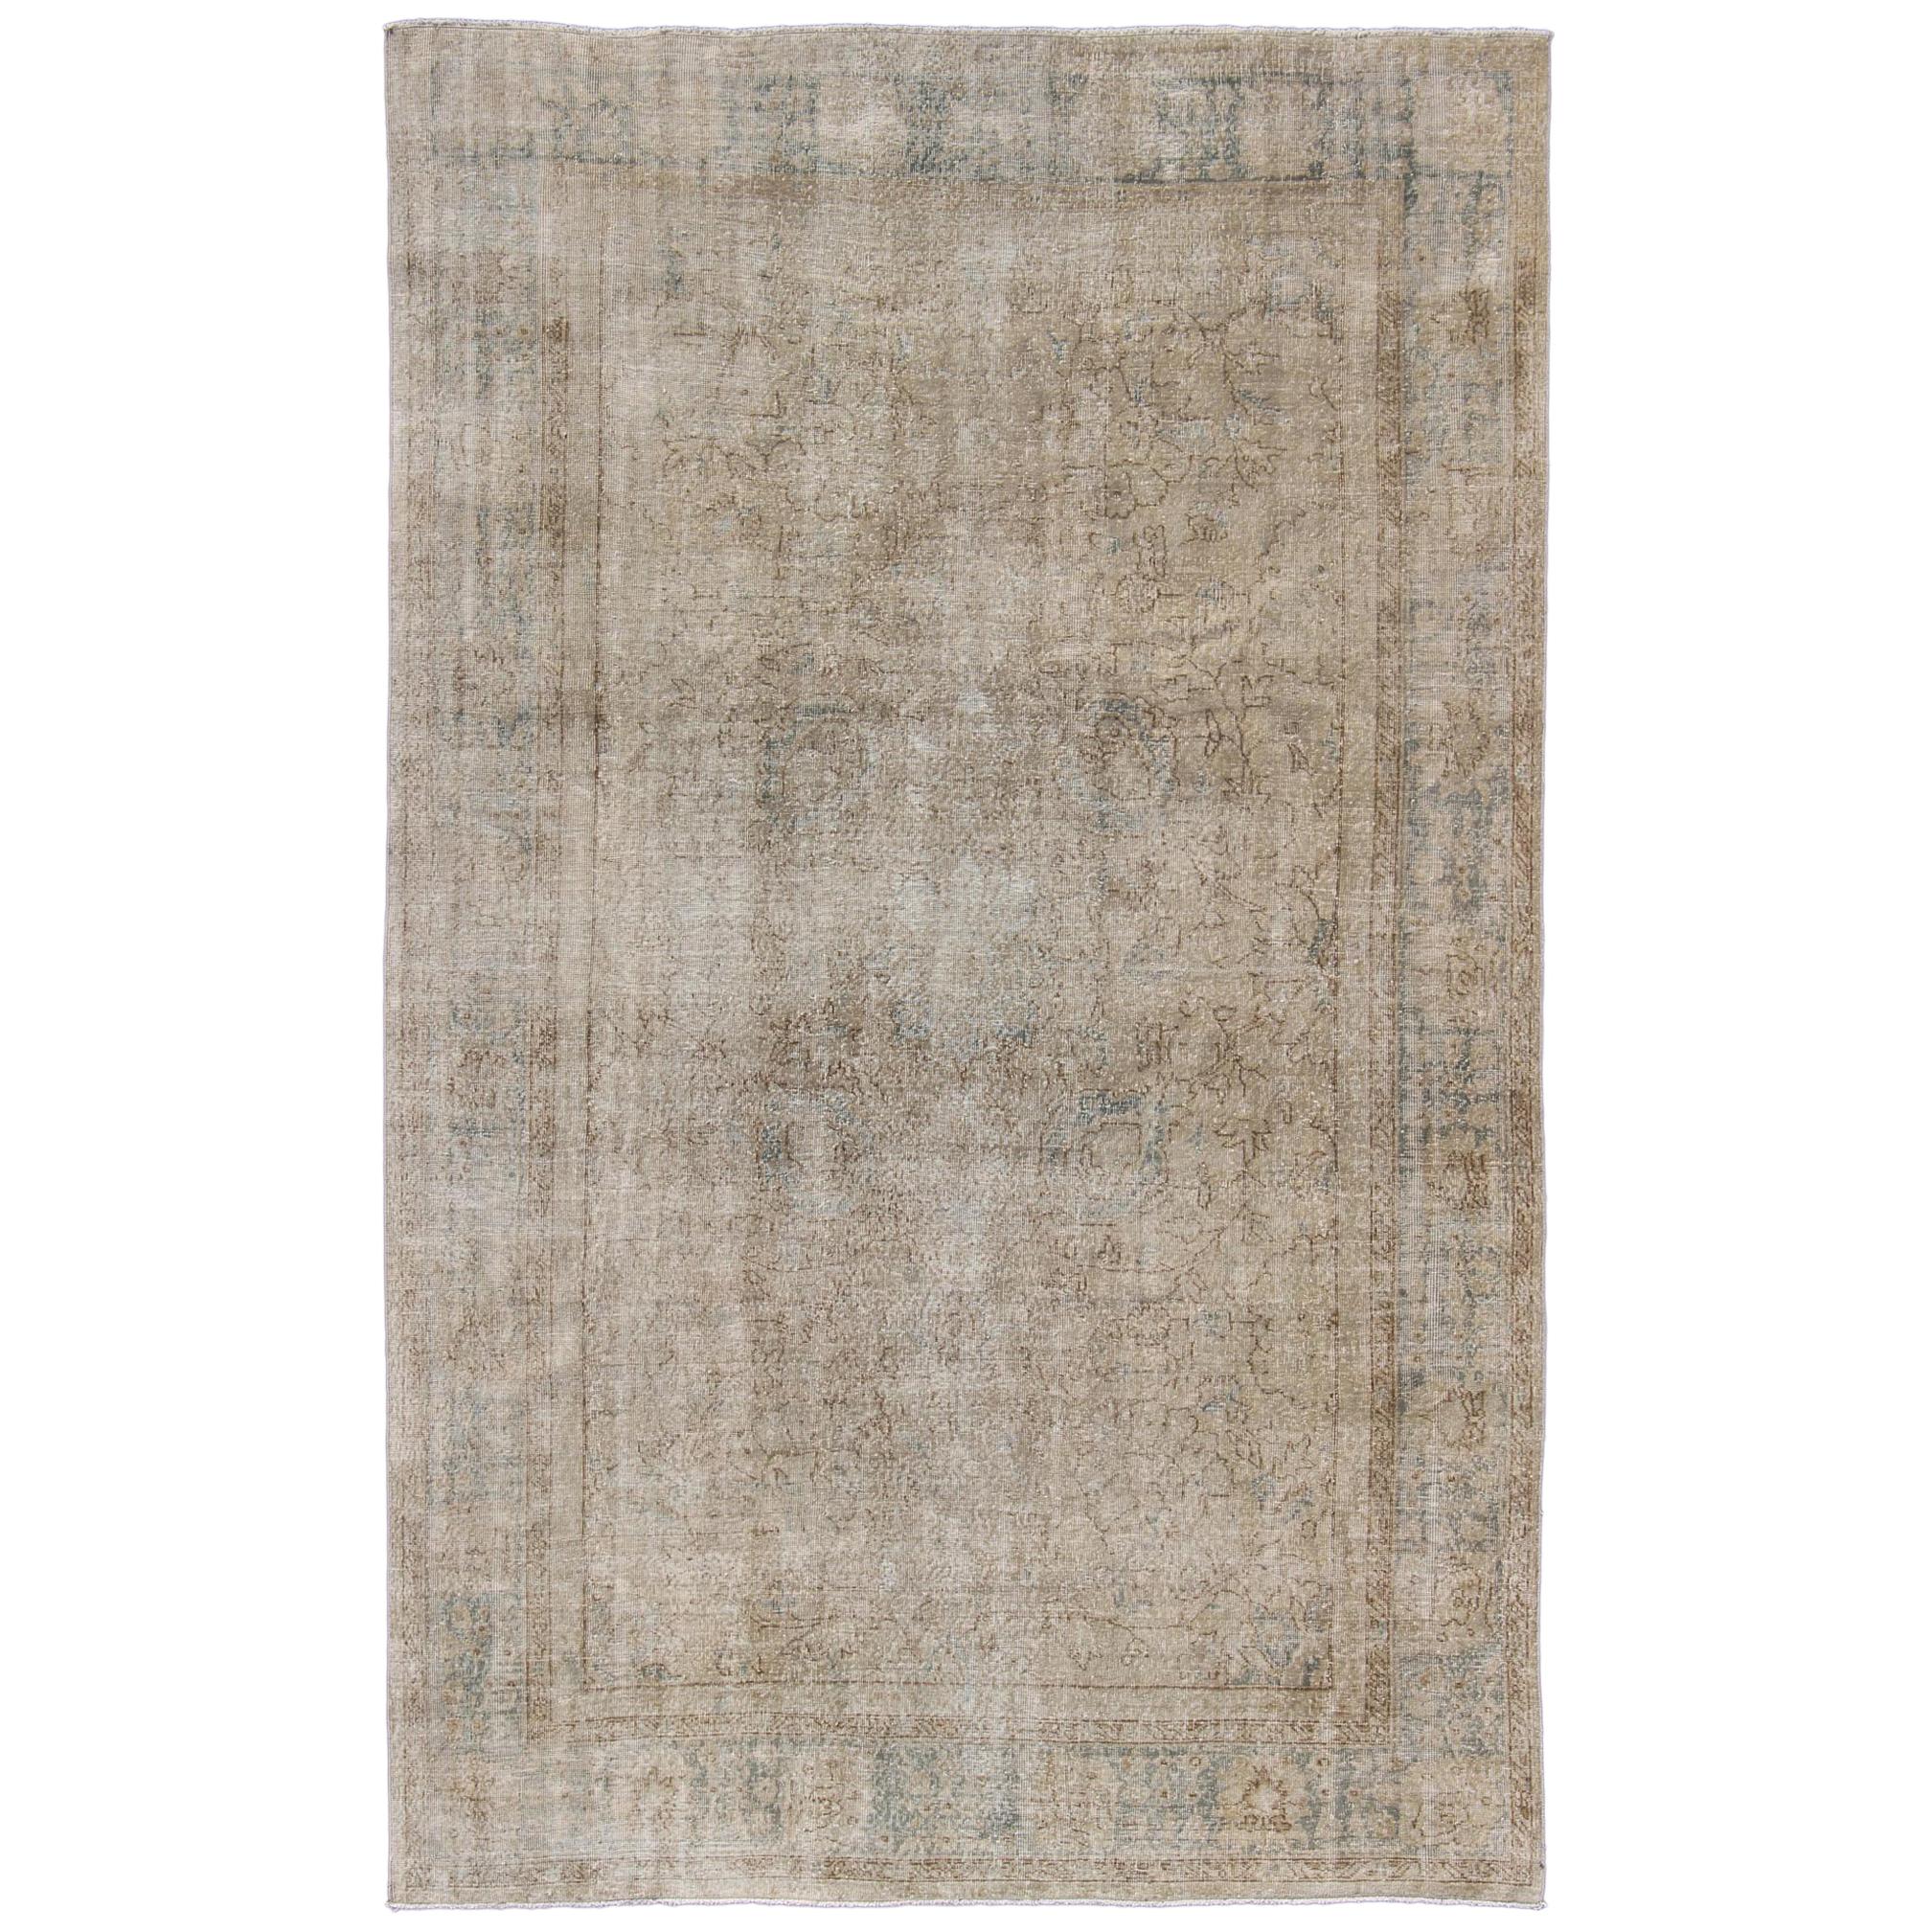 Distressed Turkish Carpet with Floral Design in Taupe, Gray, Brown and Cream